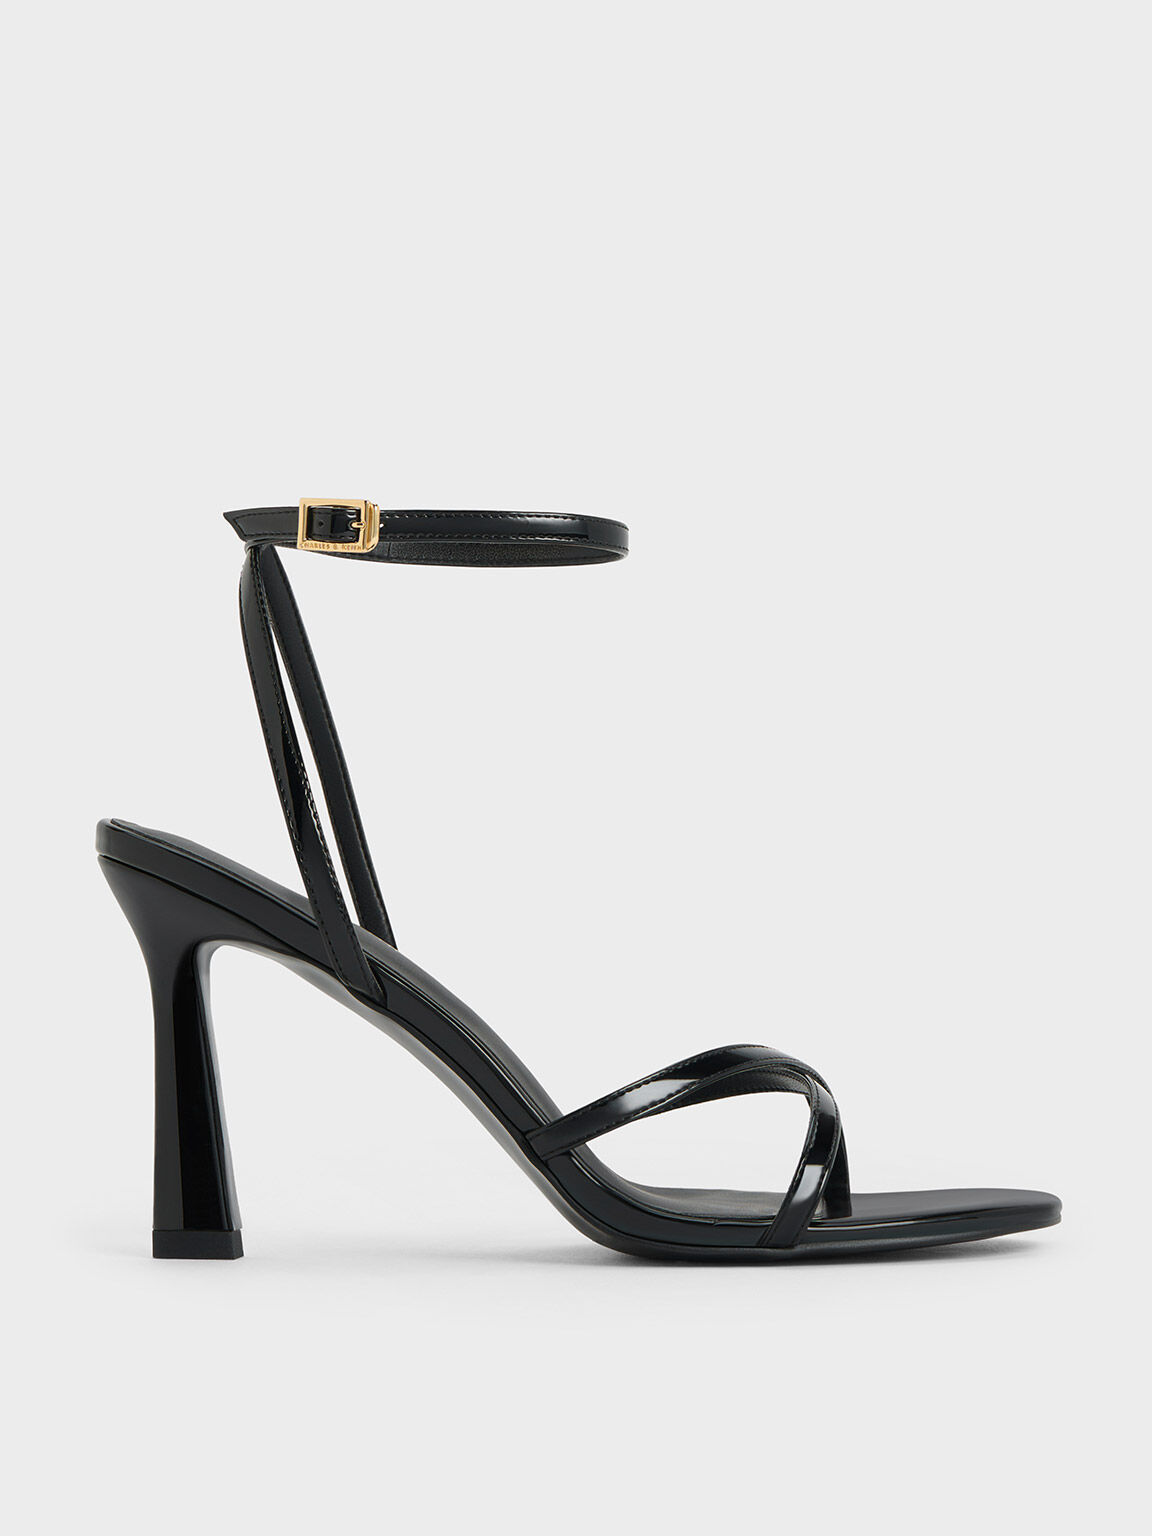 LEATHER SEQUENCE BY LANVIN CHUNKY HEELED SANDALS BLACK/GOLD | Lanvin